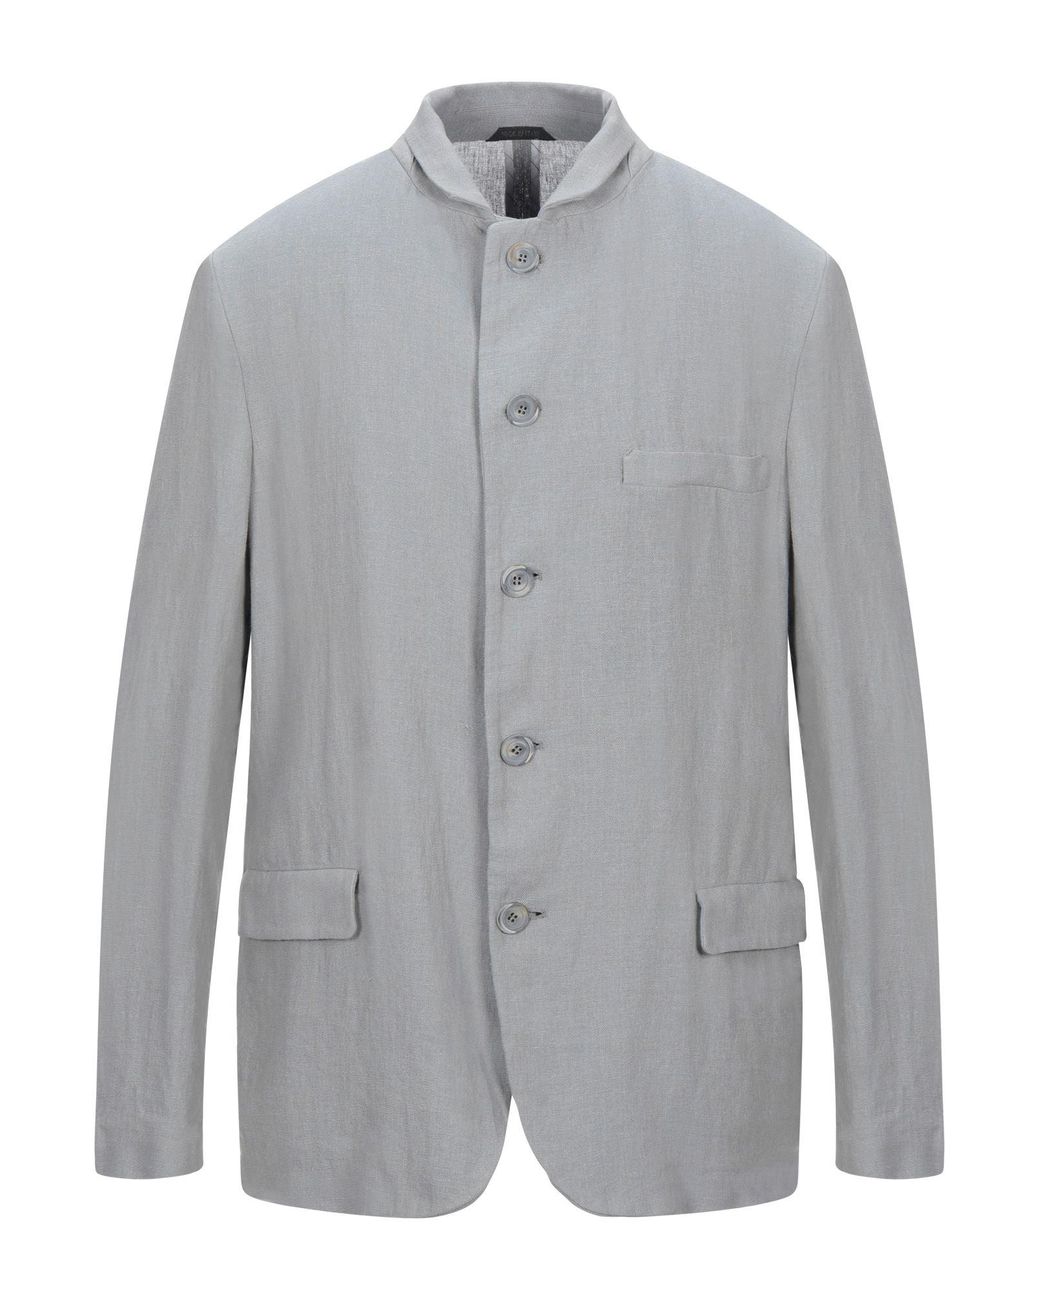 Giorgio Armani Linen Suit Jacket in Grey (Gray) for Men - Lyst